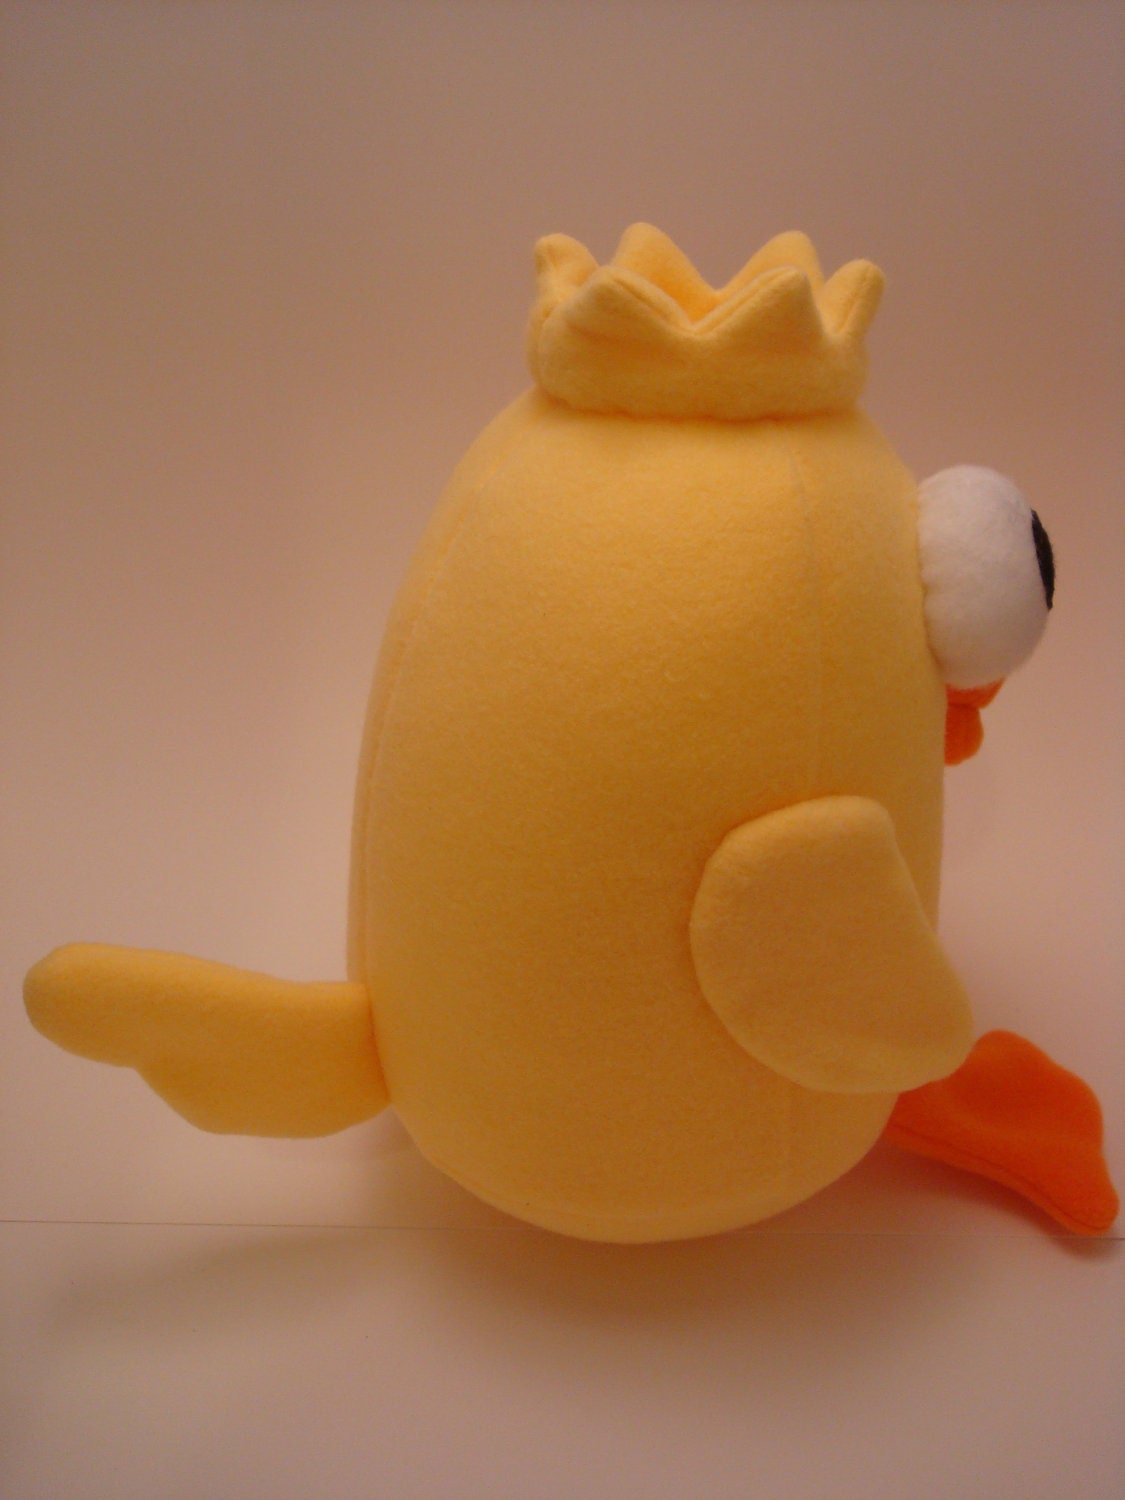 Lizzie Love version of DUCKY MOMO - Candace's Favorite Toy from Disney's Phineas & Ferb - Plush Softie